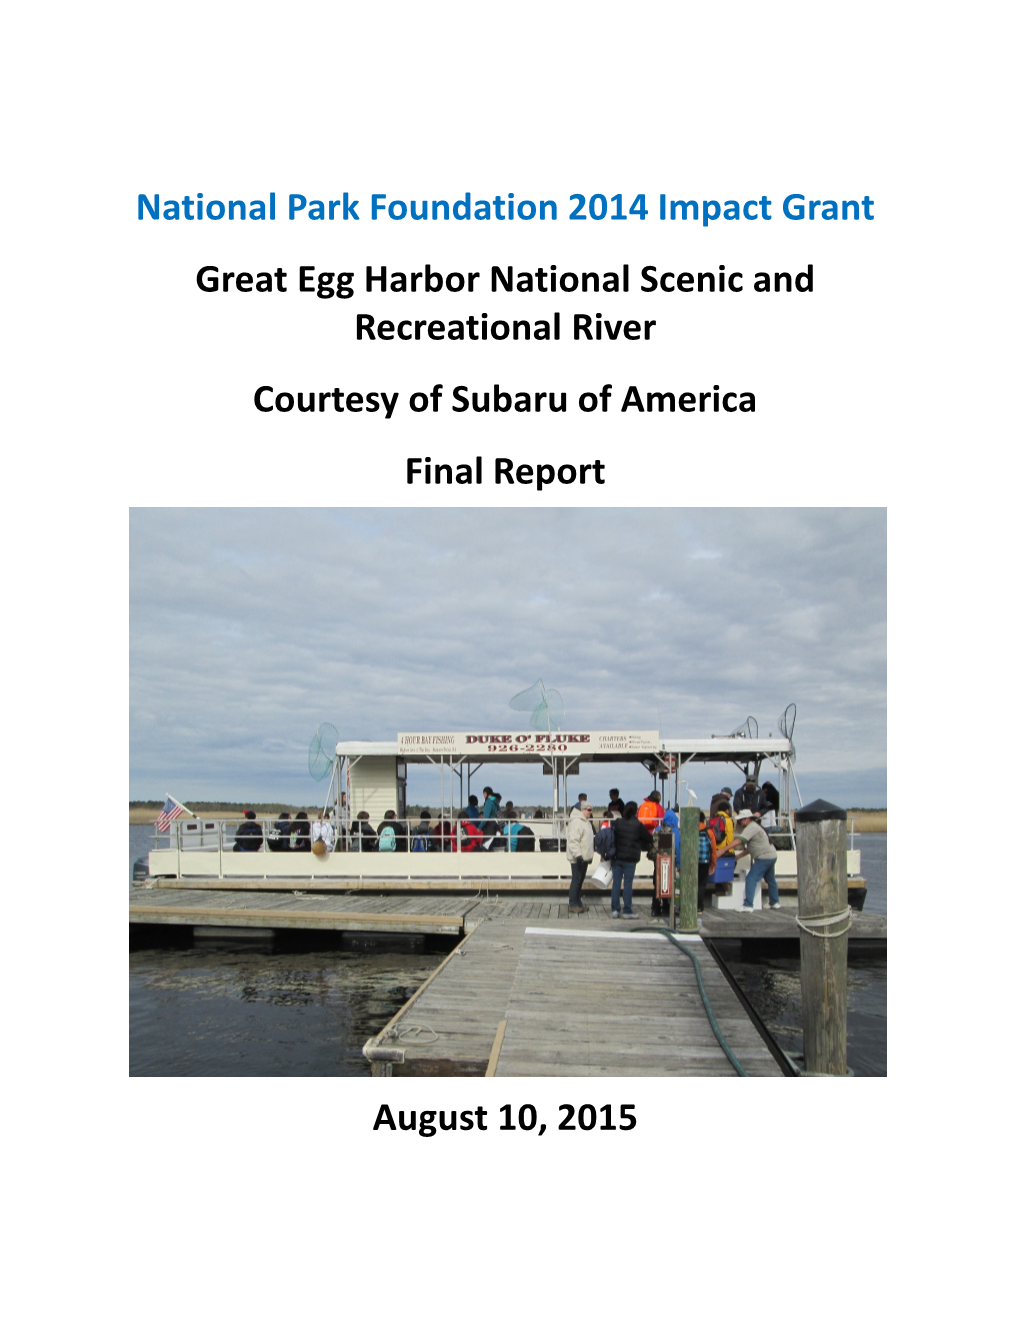 National Park Foundation 2014 Impact Grant Great Egg Harbor National Scenic and Recreational River Courtesy of Subaru of America Final Report